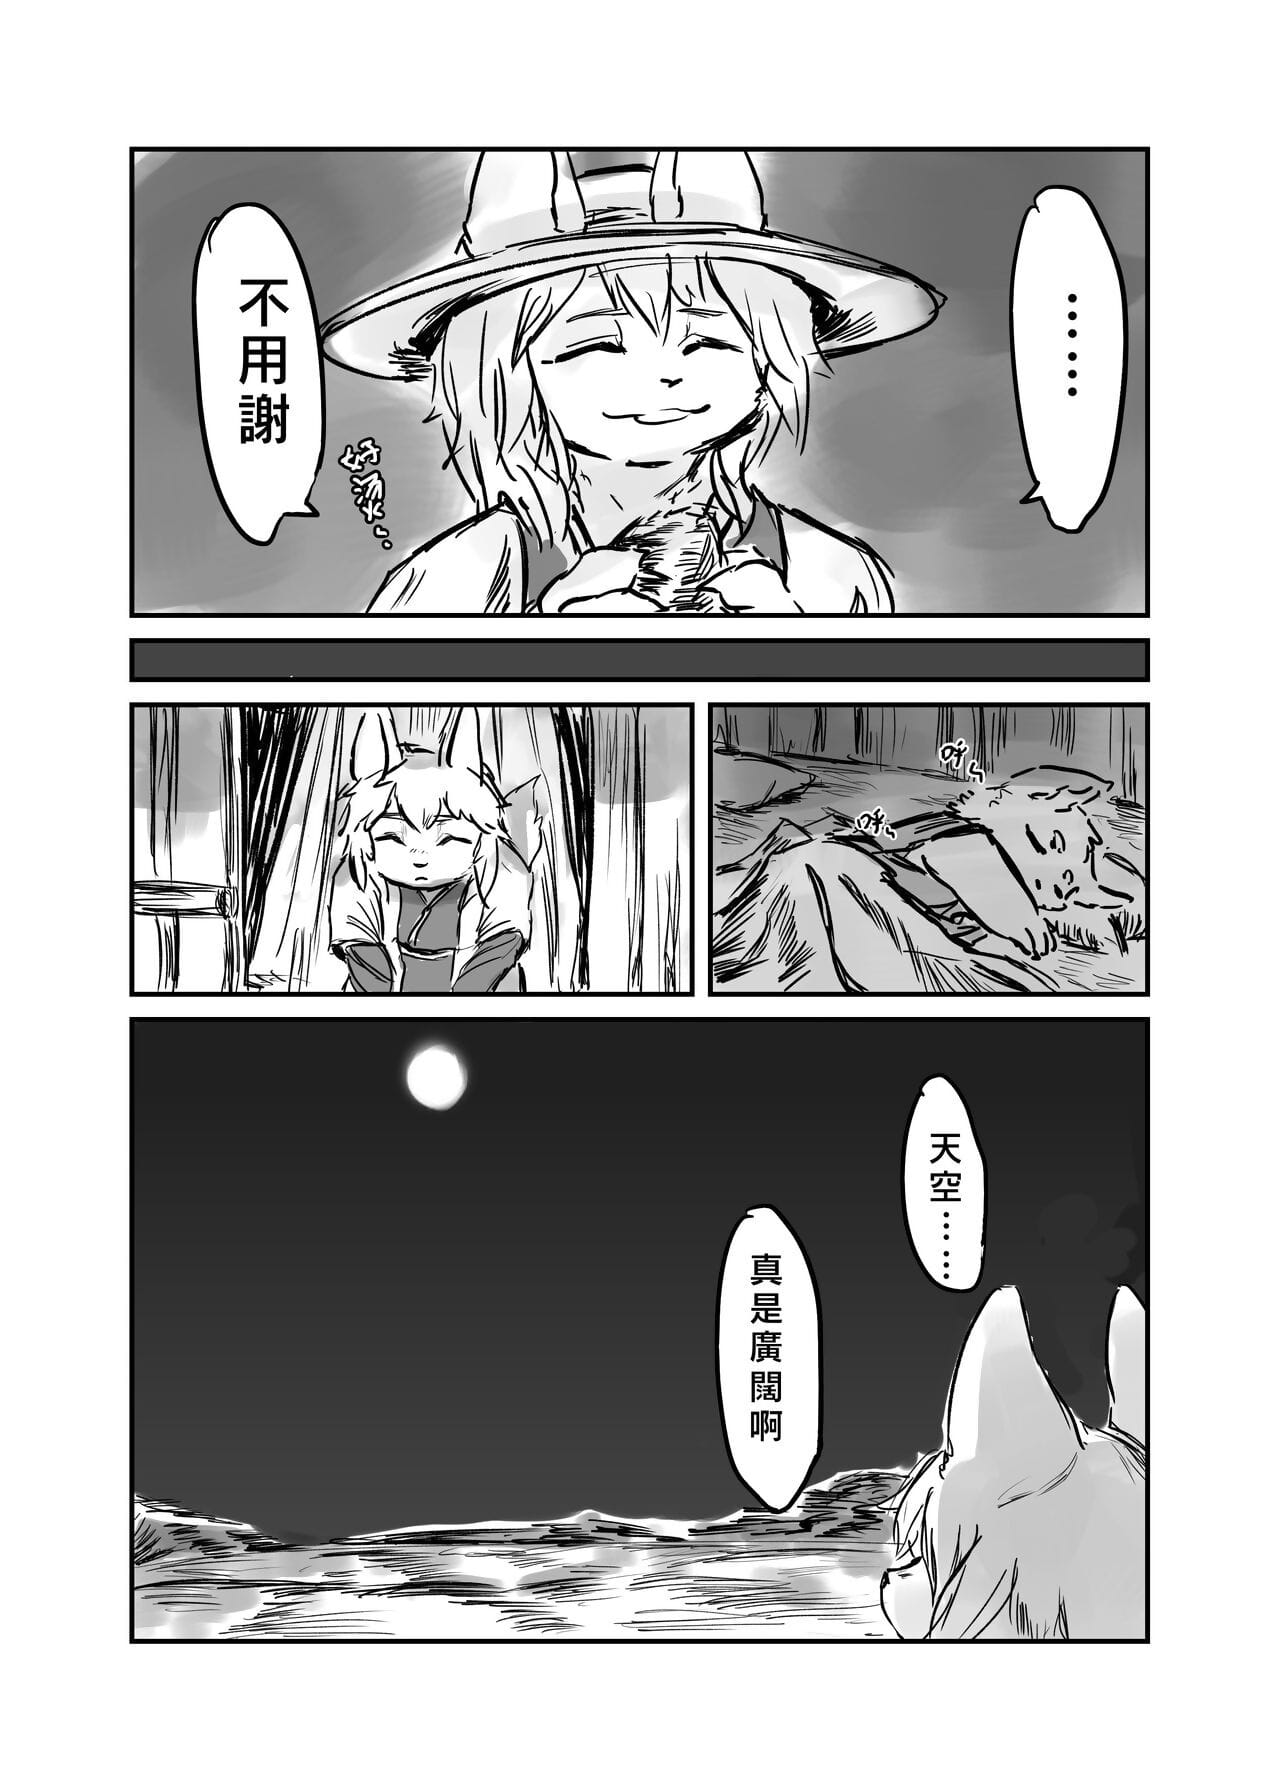 （the Besucher 他乡之人 by：鬼流 page 1